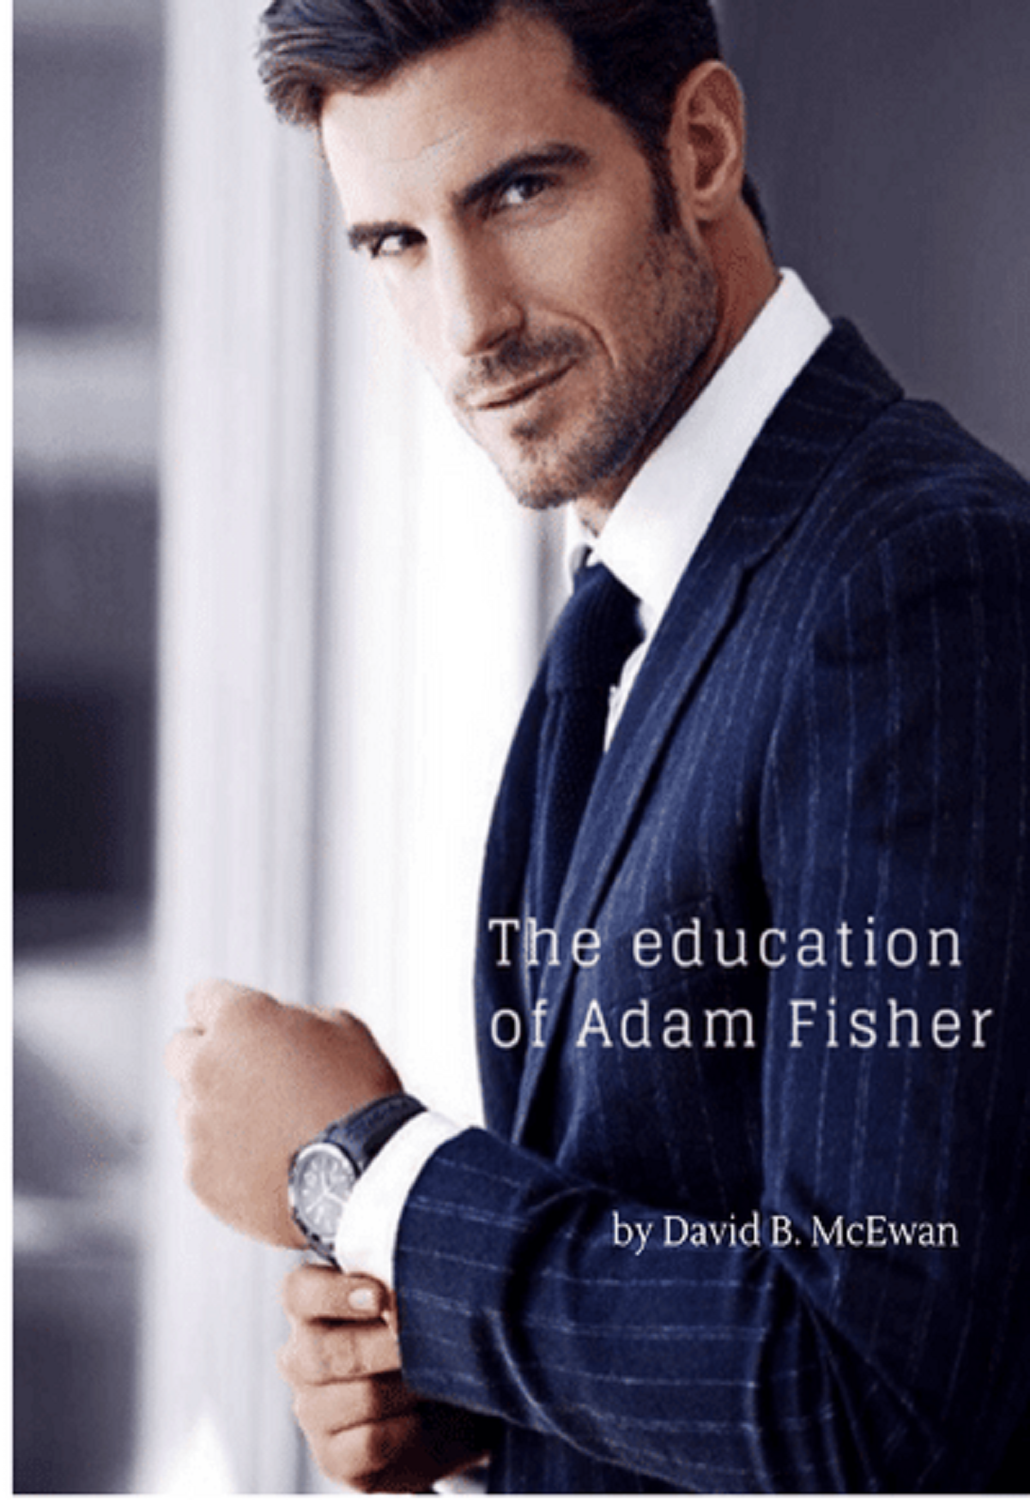 THE RE-EDUCATION OF ADAM FISHER